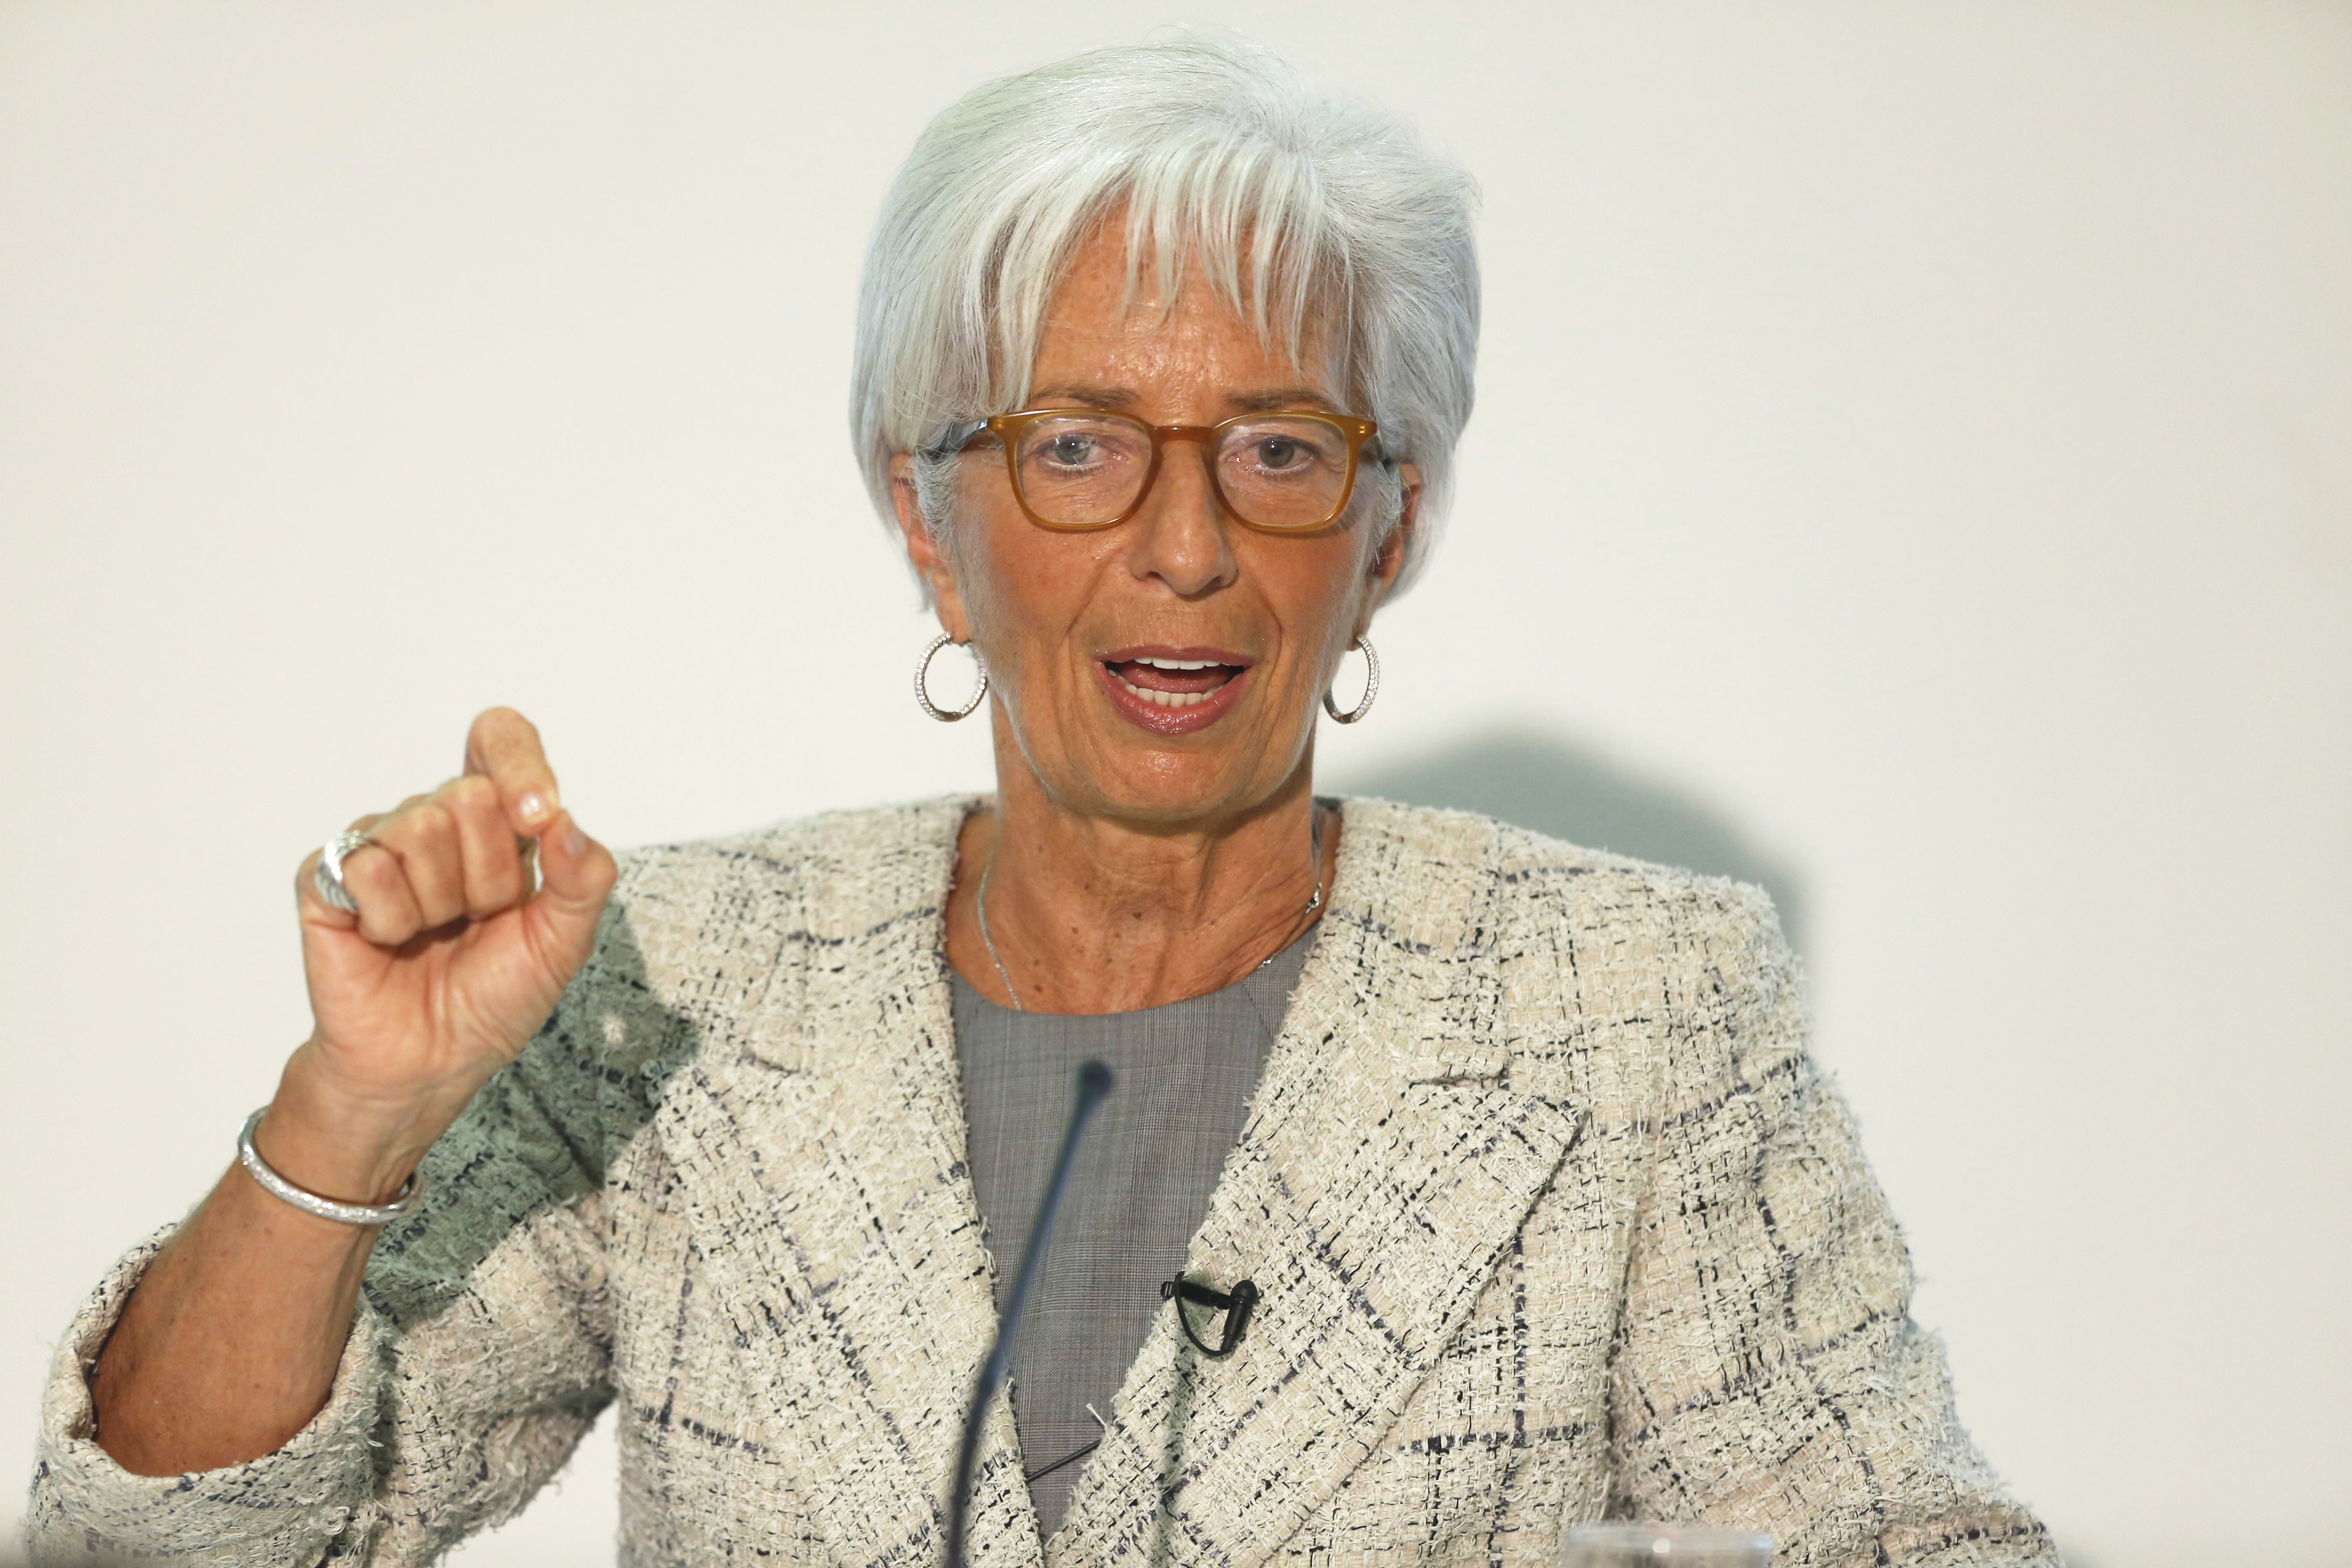 WARNING. Christine Lagarde, managing director of the International Monetary Fund (IMF), speaks during a joint news conference with Britain's Chancellor of the Exchequer George Osborne (unseen), at the HM Treasury in London, Britain on May 13, 2016. Photo by Luke MacGregor/EPA 